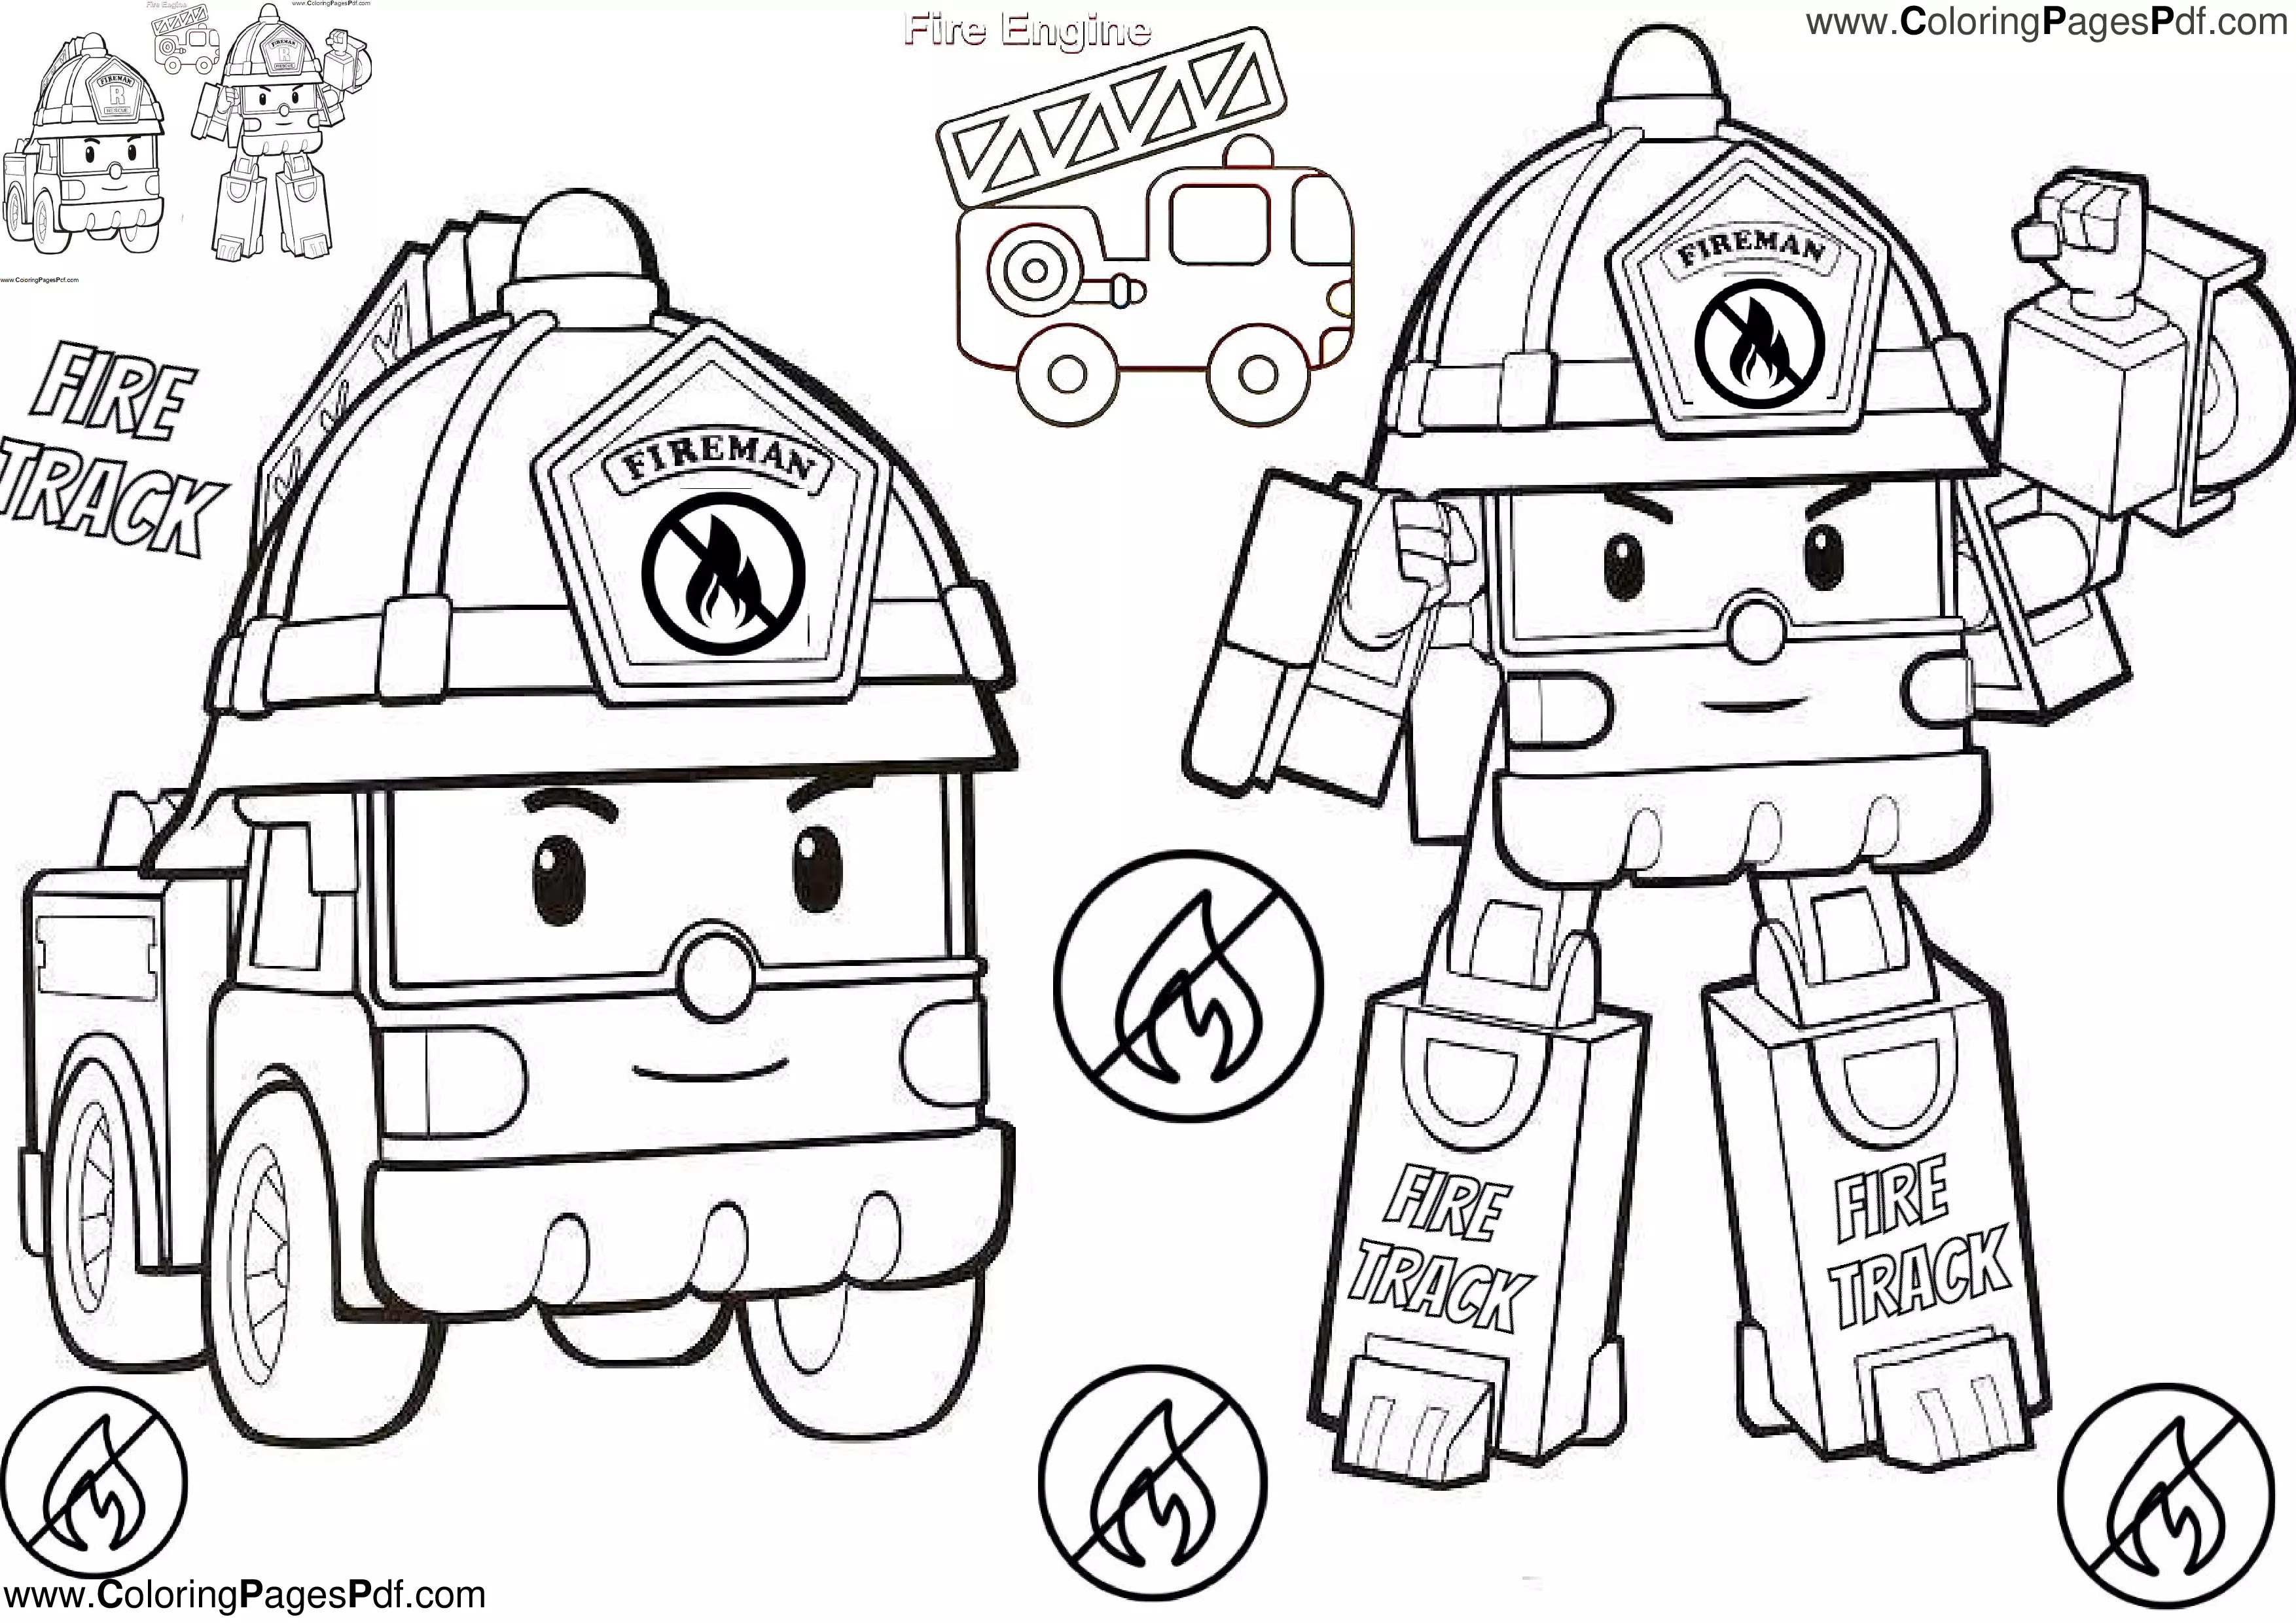 Fire truck coloring pages for kids